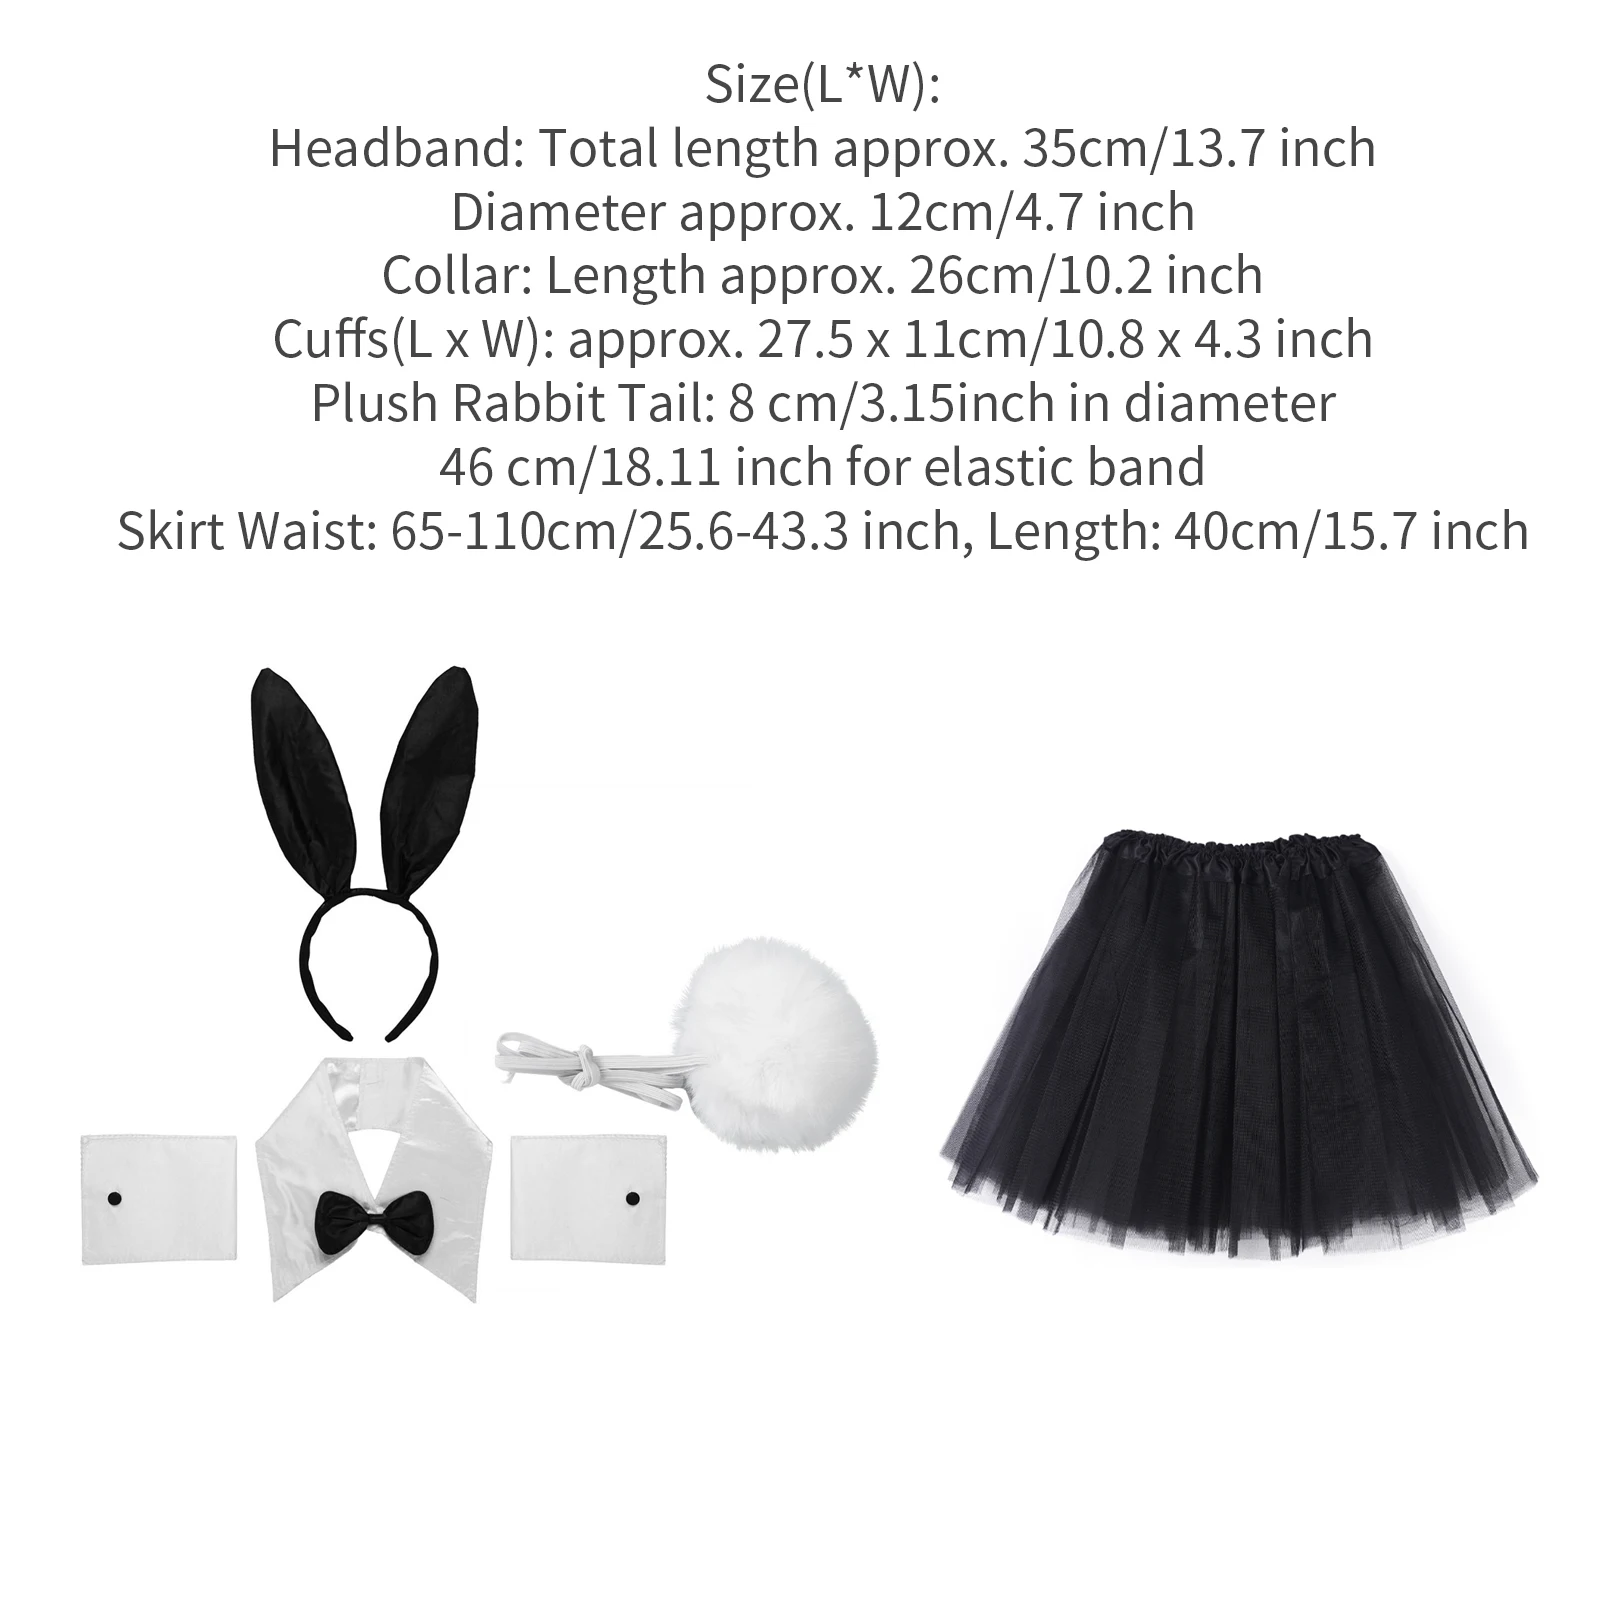 anime outfits Women Bunny Costume Accessory Set Sexy Role Play Outfits Rabbit Ear Headband Collar Bow Tie Cuffs Tail Skirt for Halloween Party ninja costume women